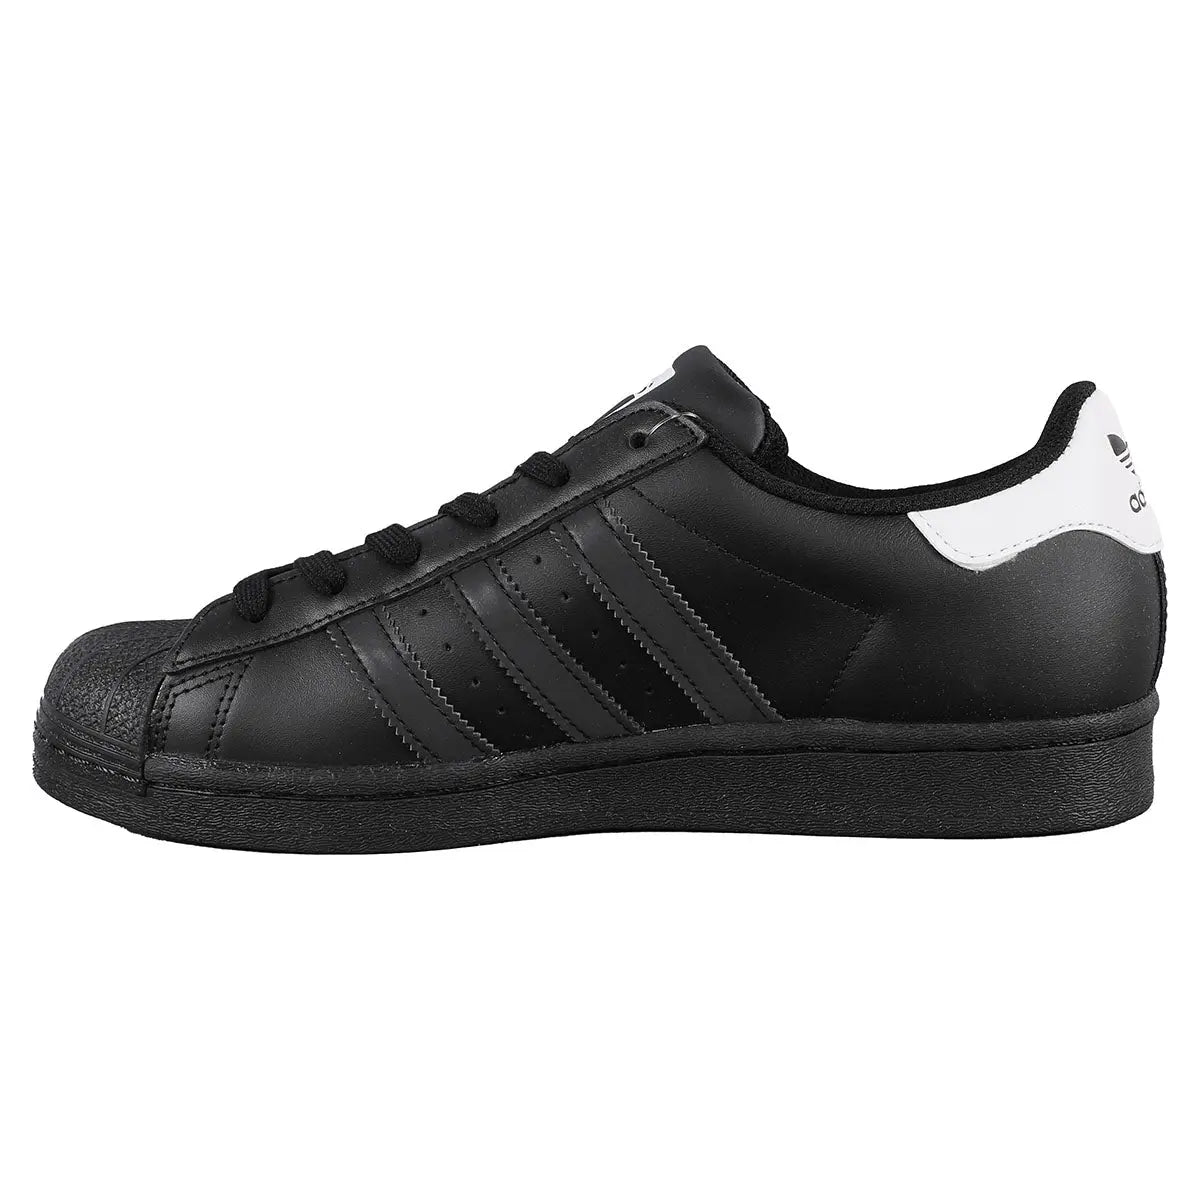 adidas, Shoes, Adidas Superstar Sneakers Womens 65 White Black Shell Toe  Lace Up Shoes